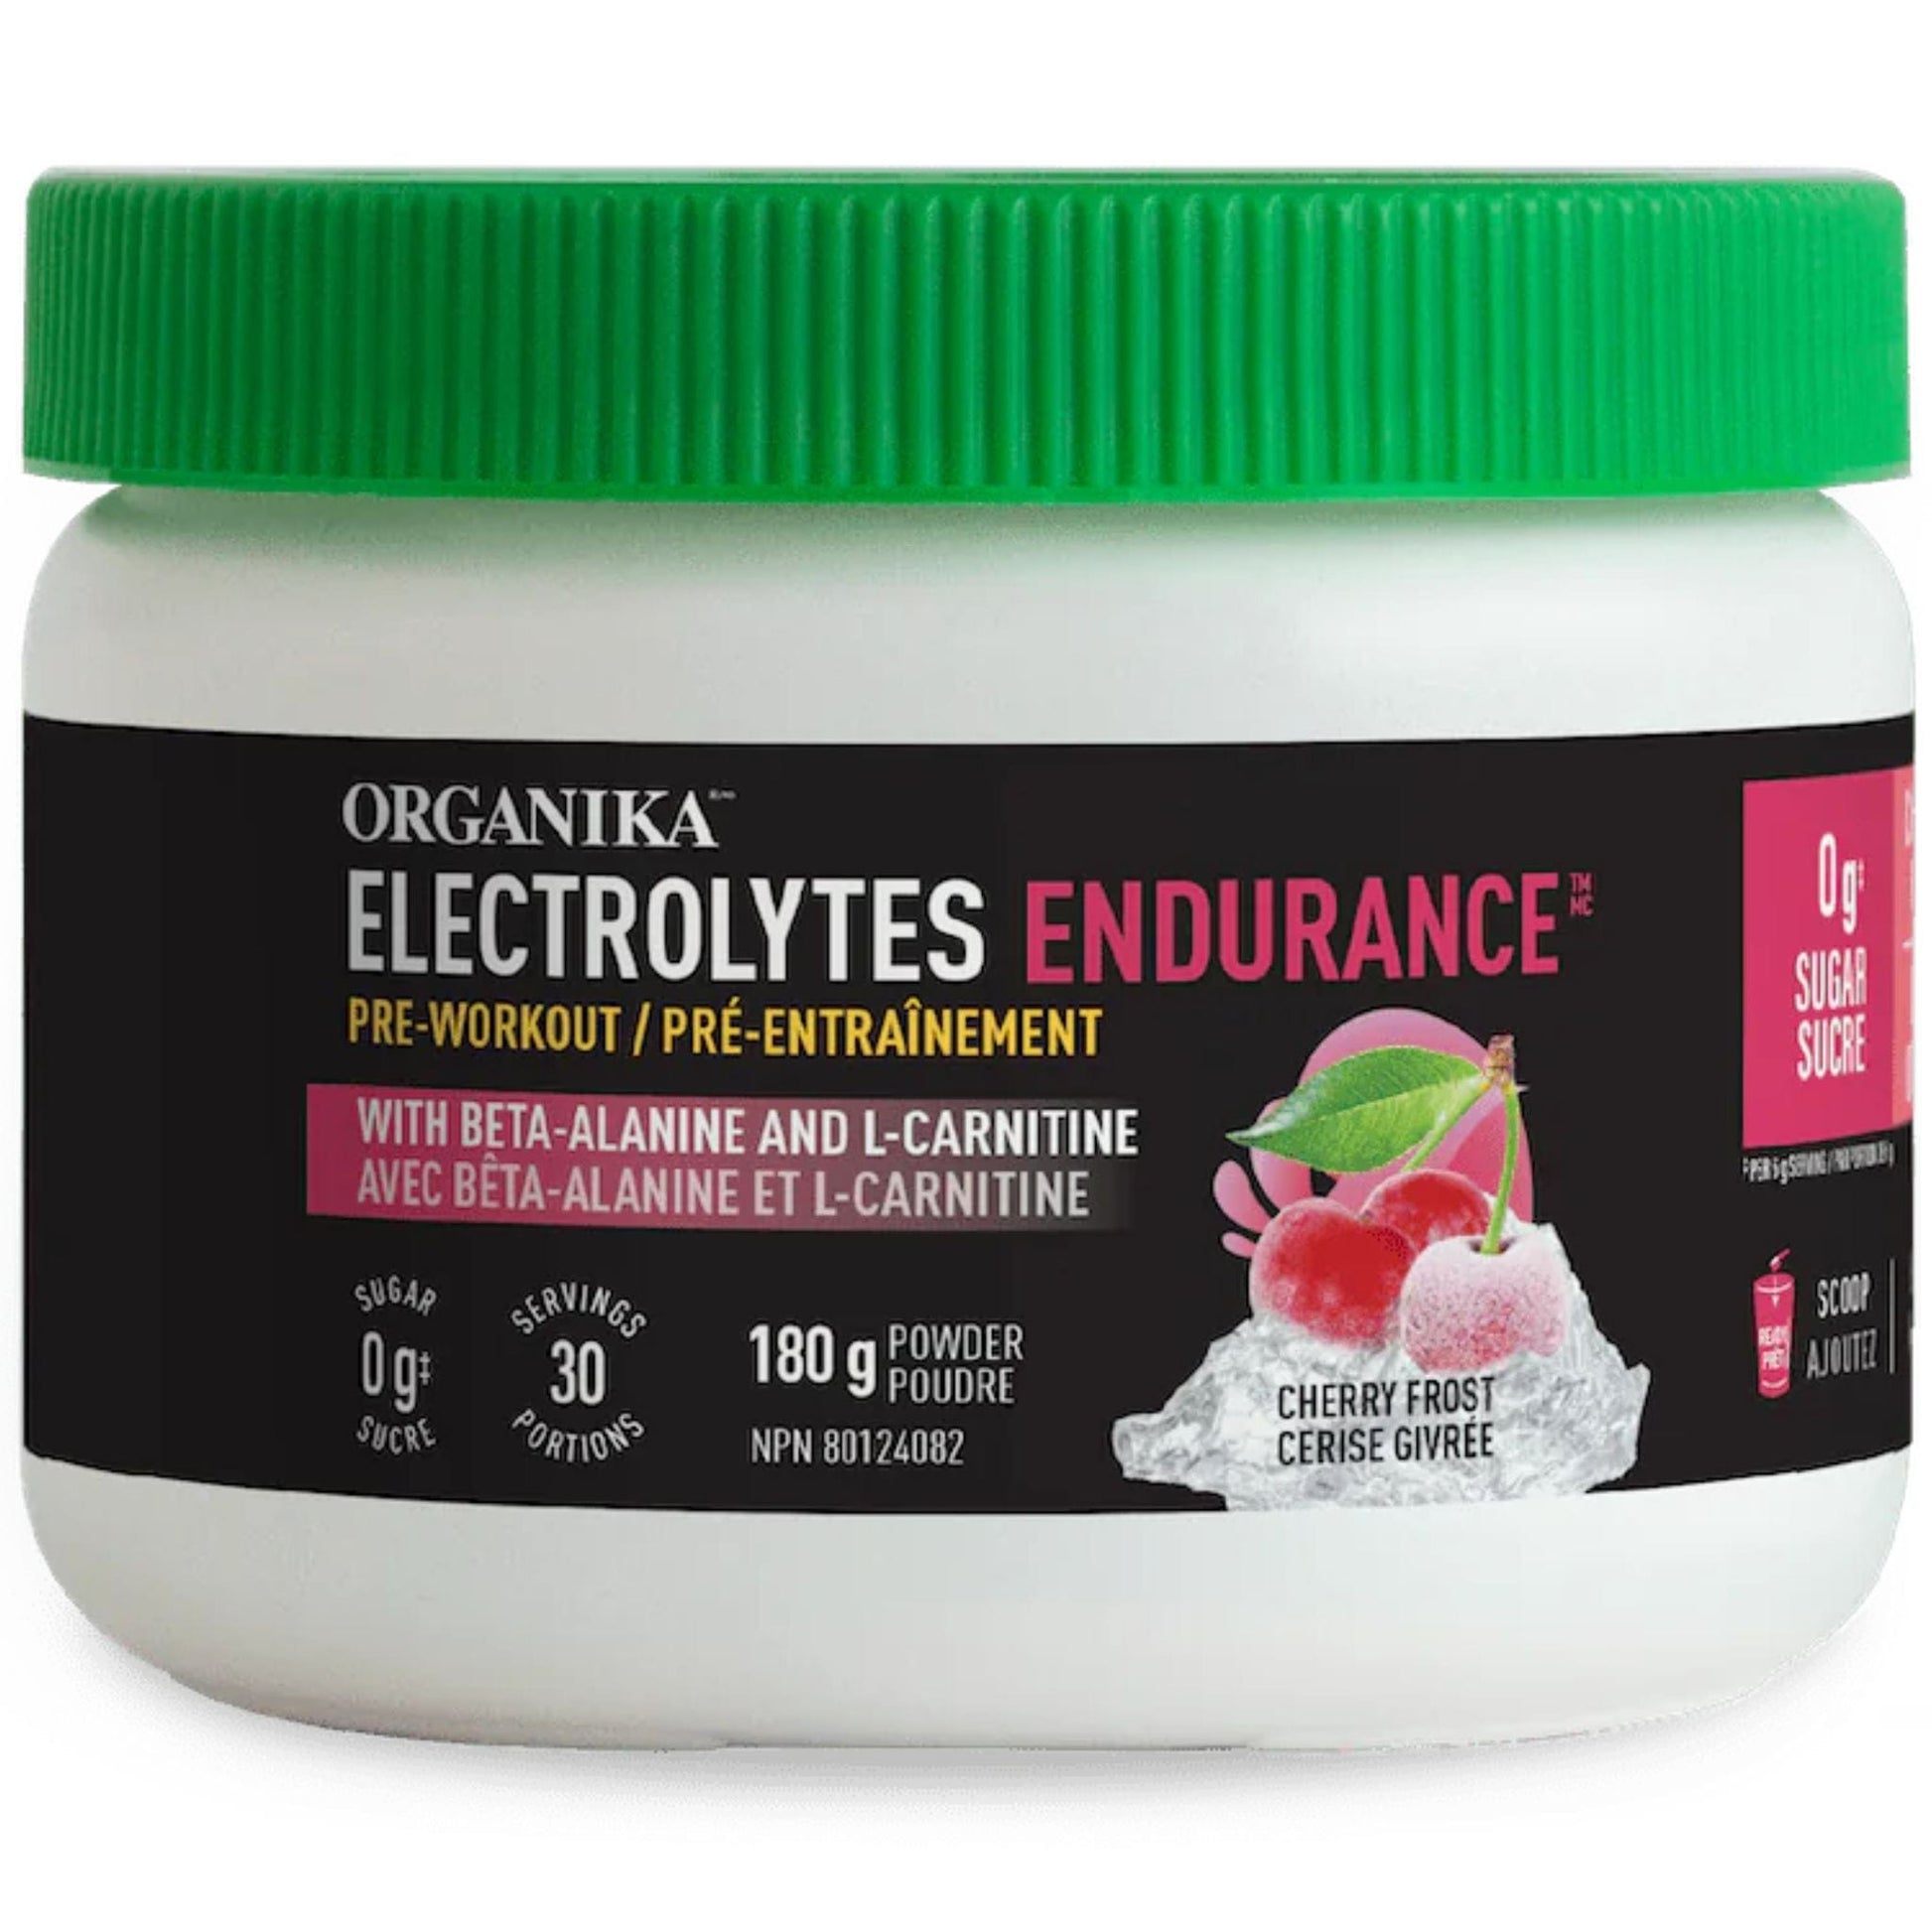 organika-electrolytes-endurance-pre-workout-beta-alanine-and-l-carnitine-cherry-frost-180g-front-bottle